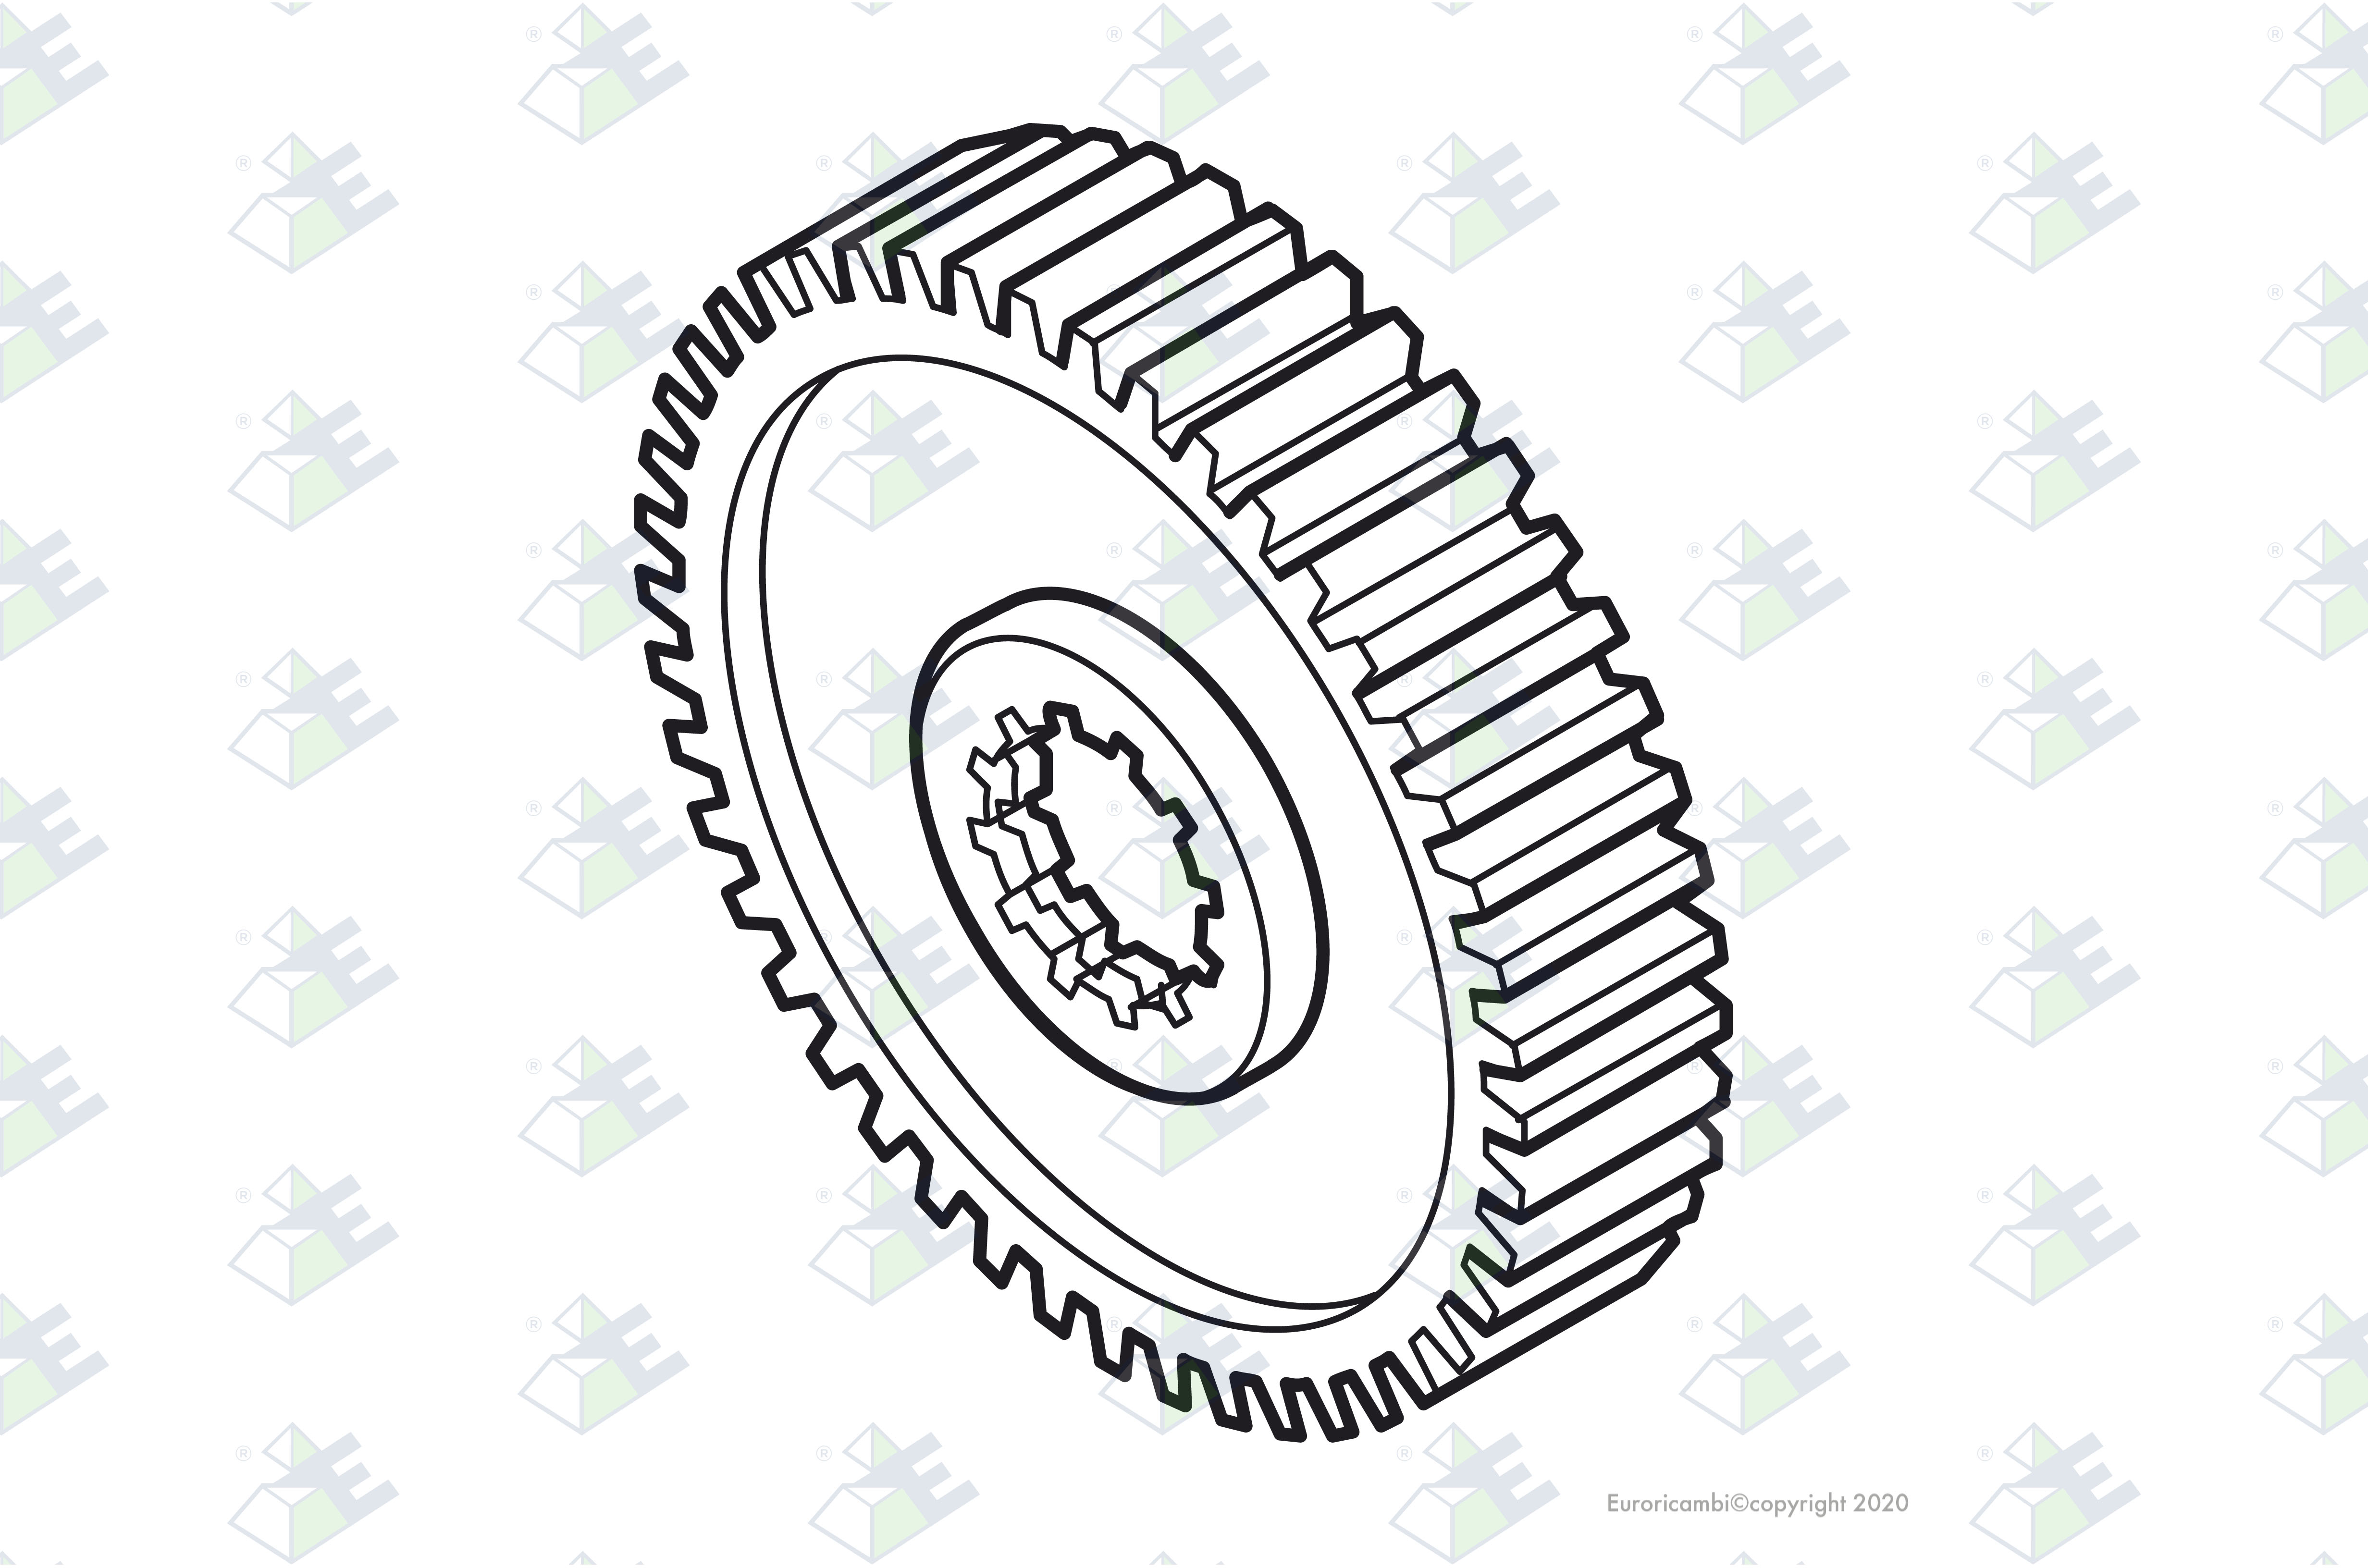 GEAR M/S 2ND SPEED 34 T. suitable to EATON - FULLER 16945